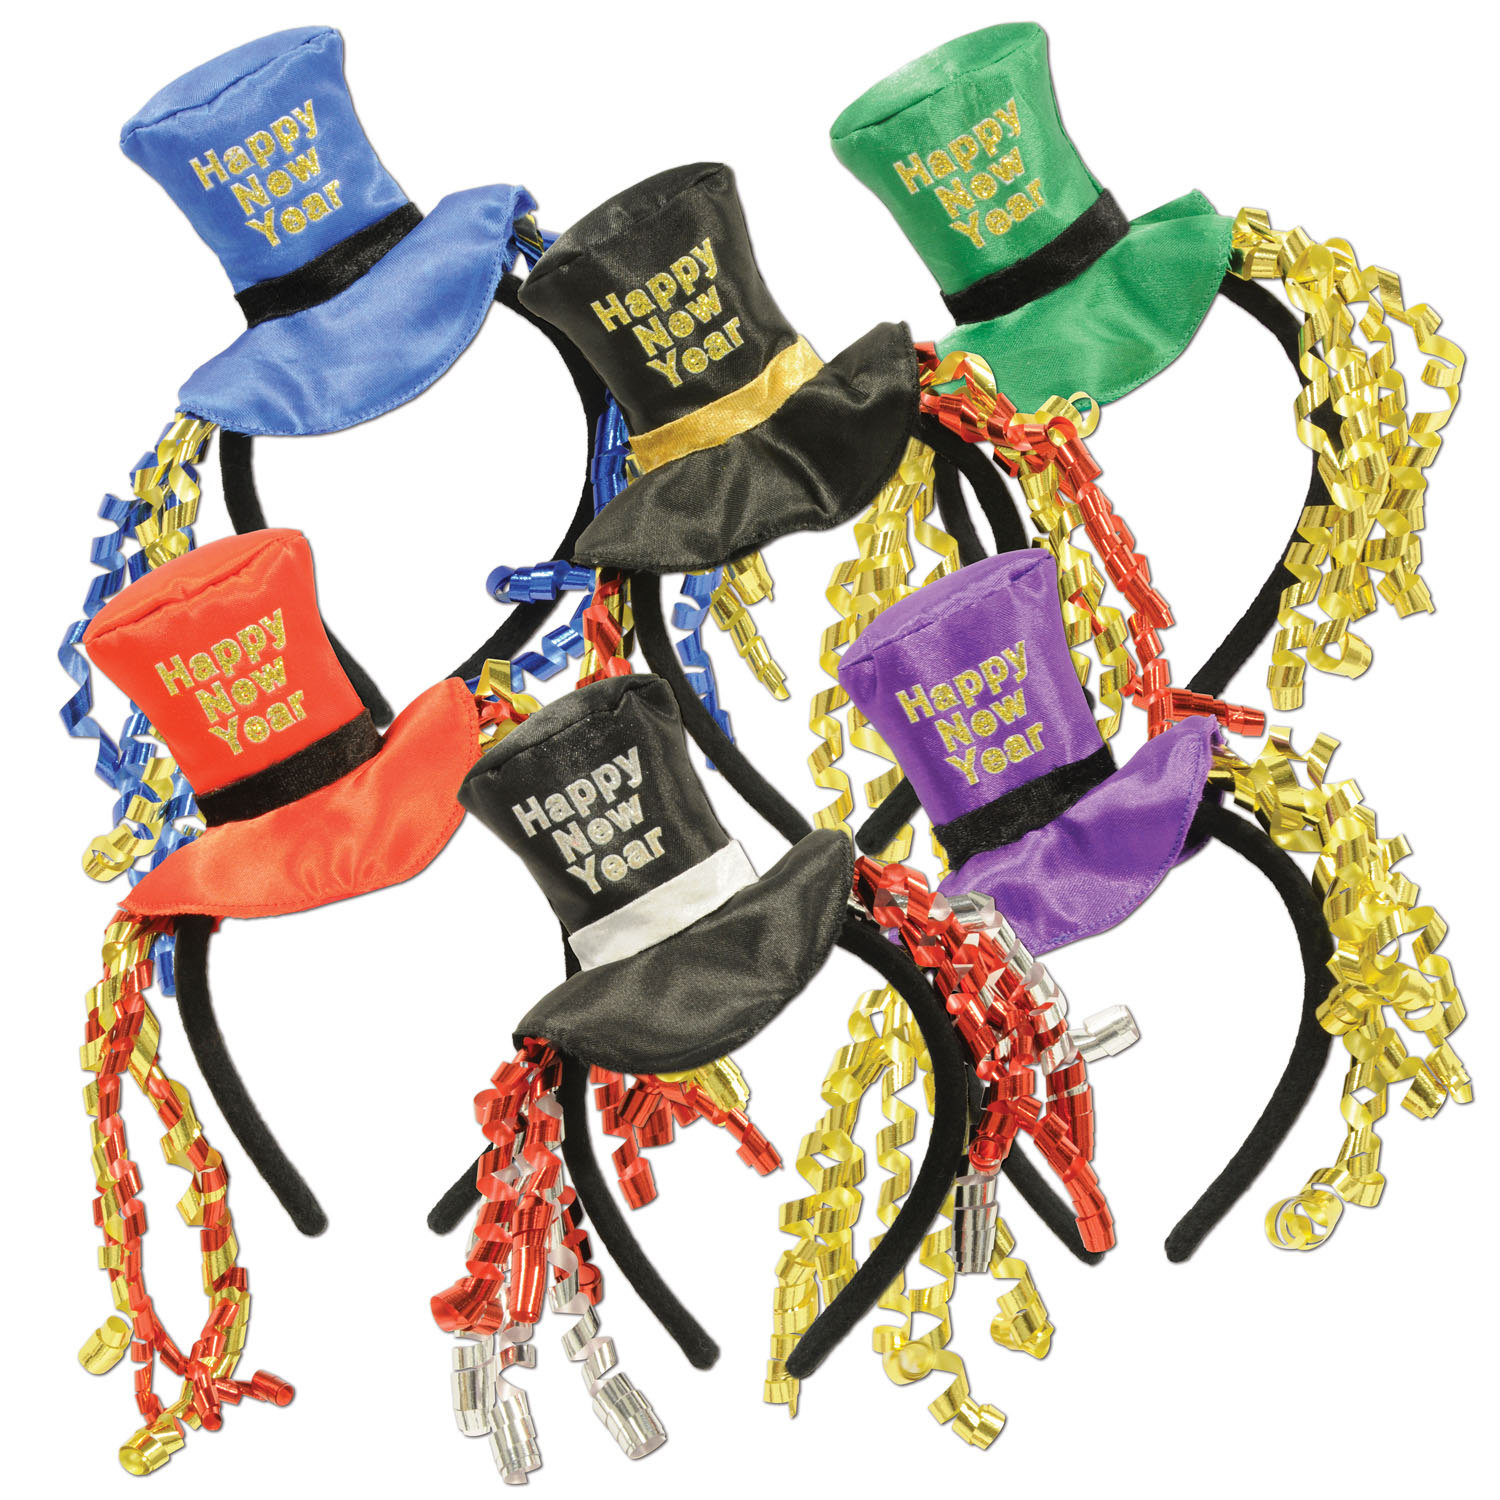 Multi-colored pack of headbands with top hats that reads "Happy New Year" with curled ribbon.